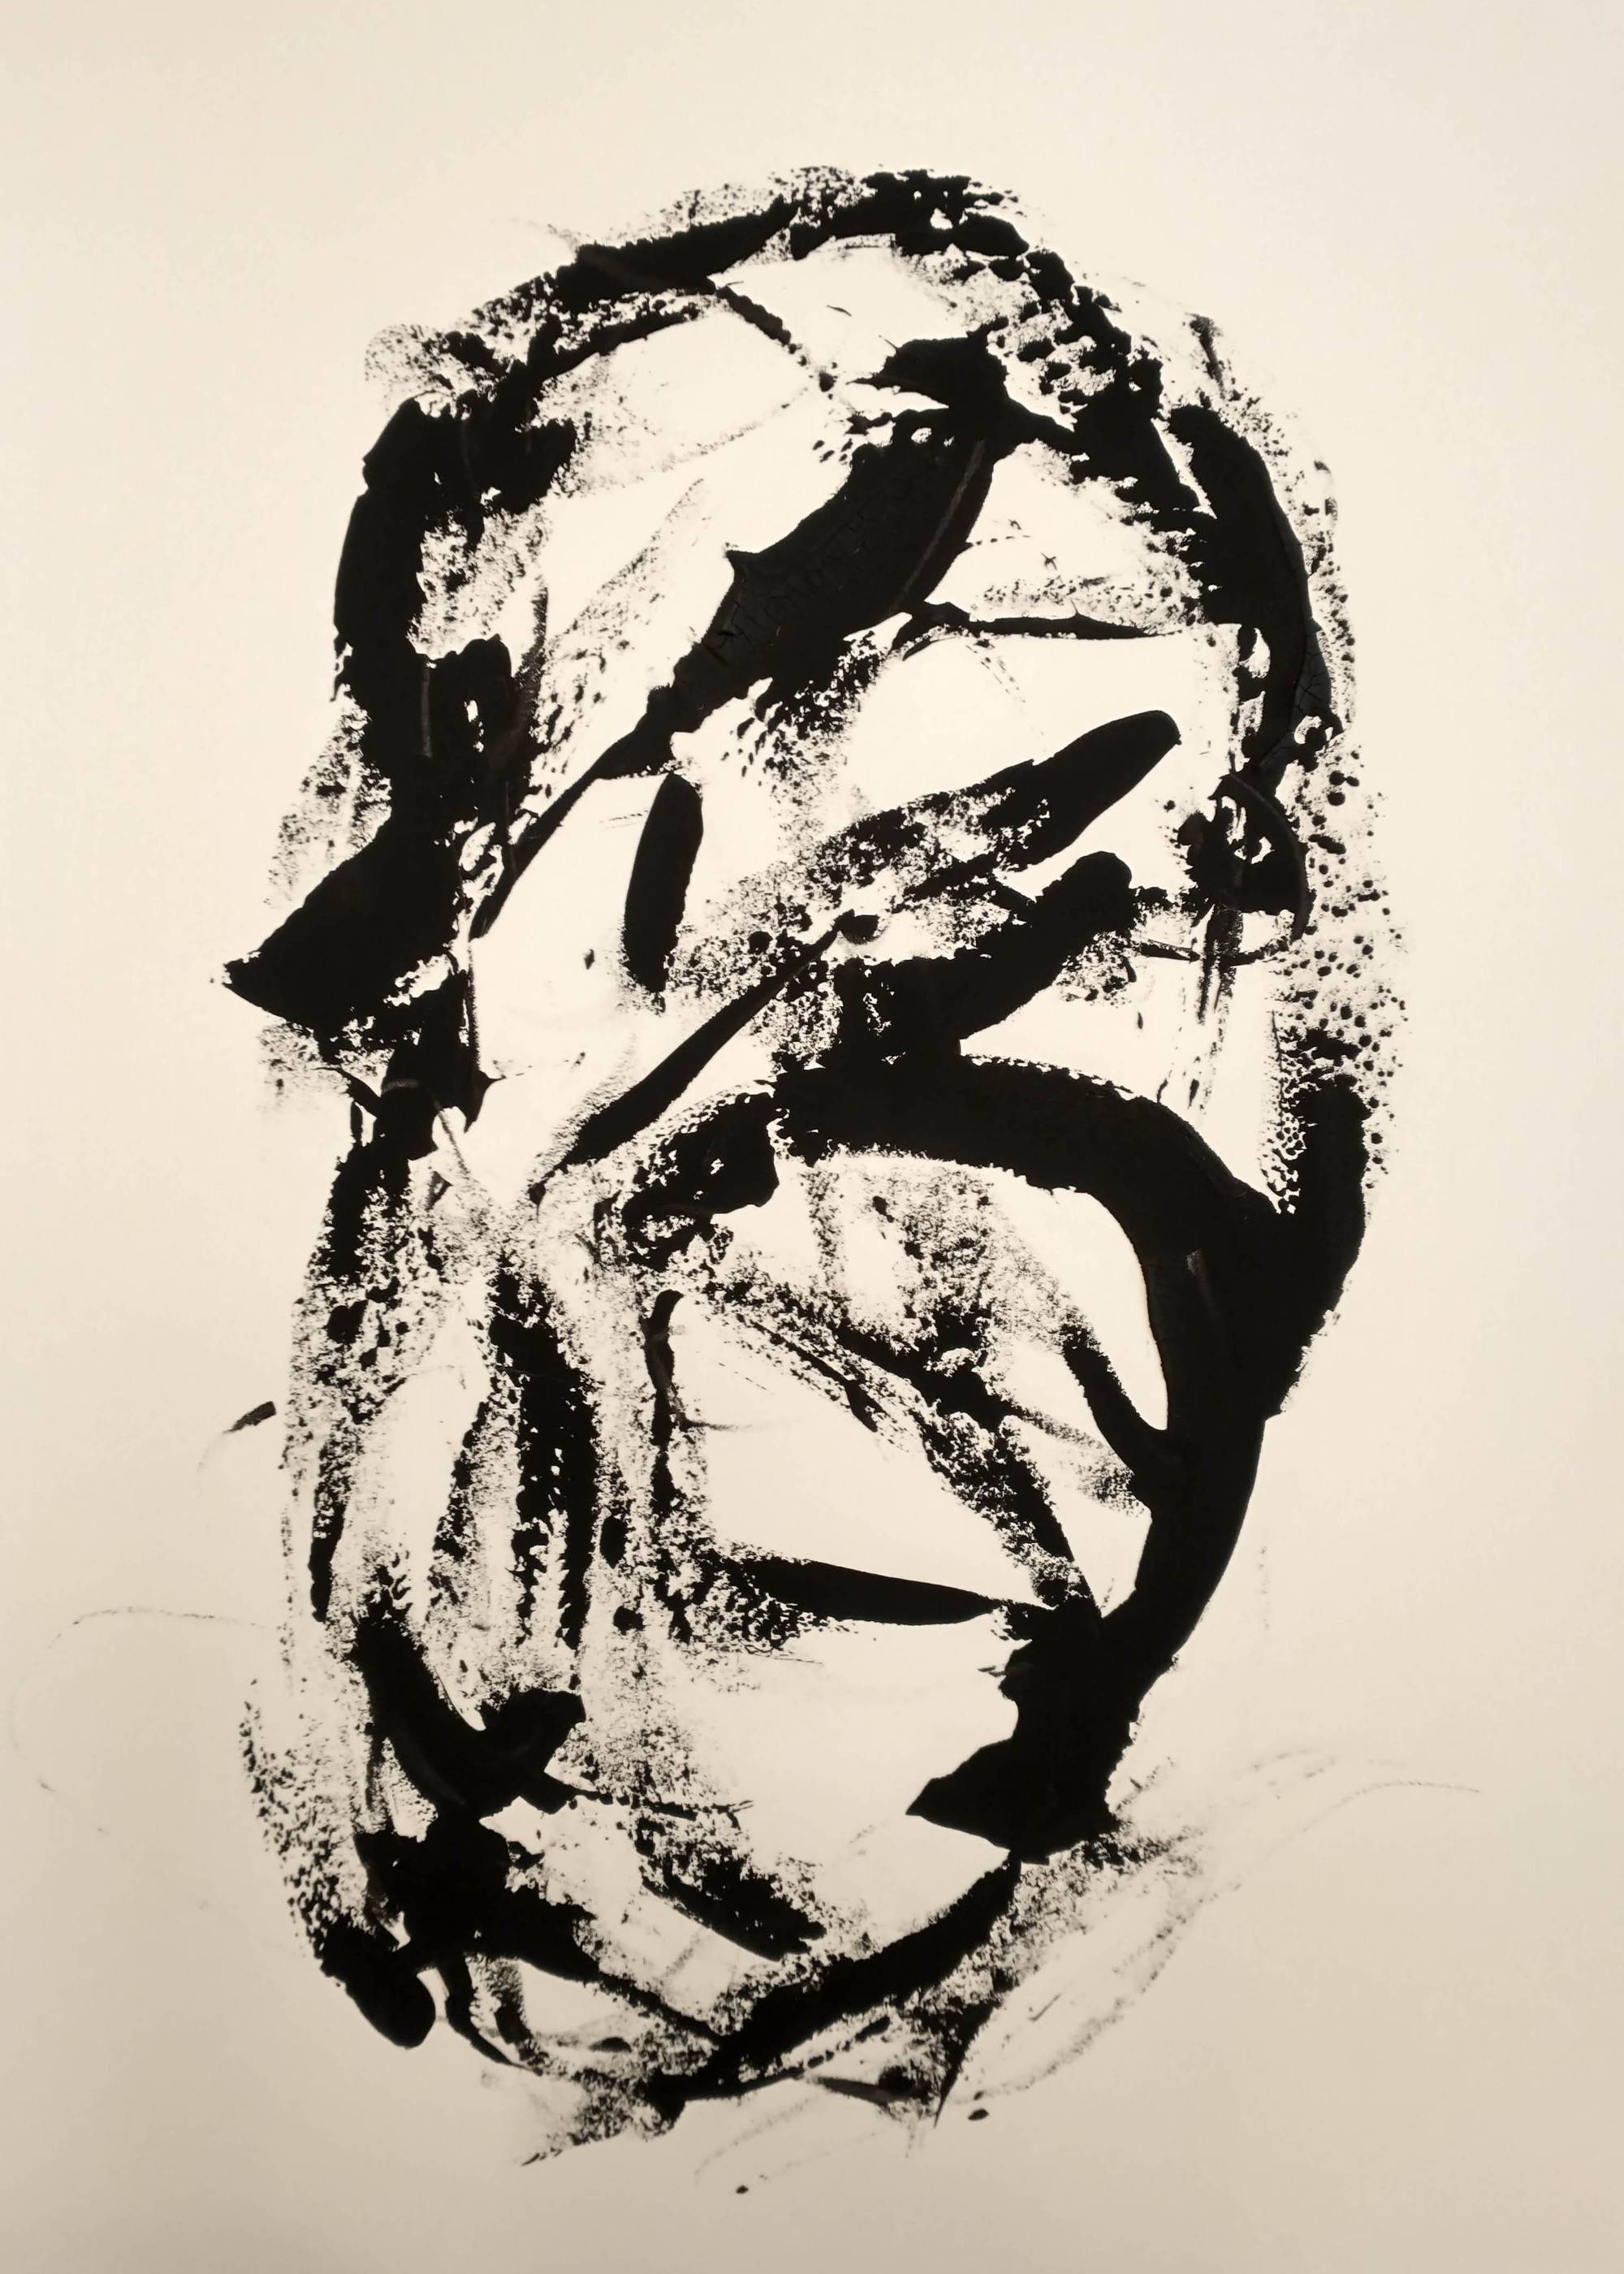 Black ink gesture drawing of face